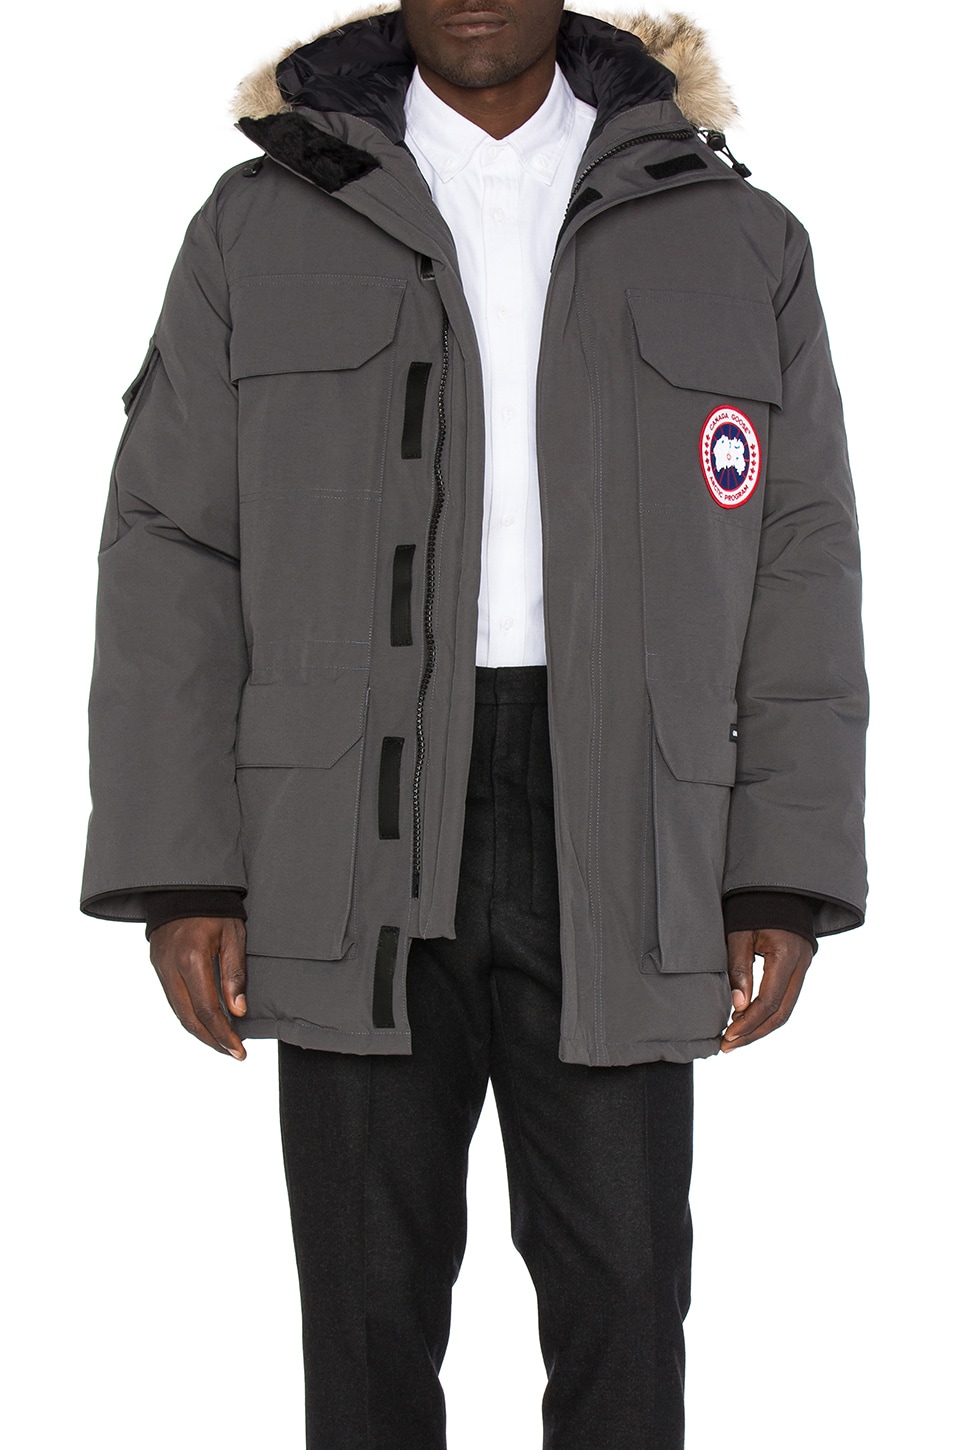 CANADA GOOSE Expedition Coyote Fur-Trimmed Jacket in Graphite | ModeSens